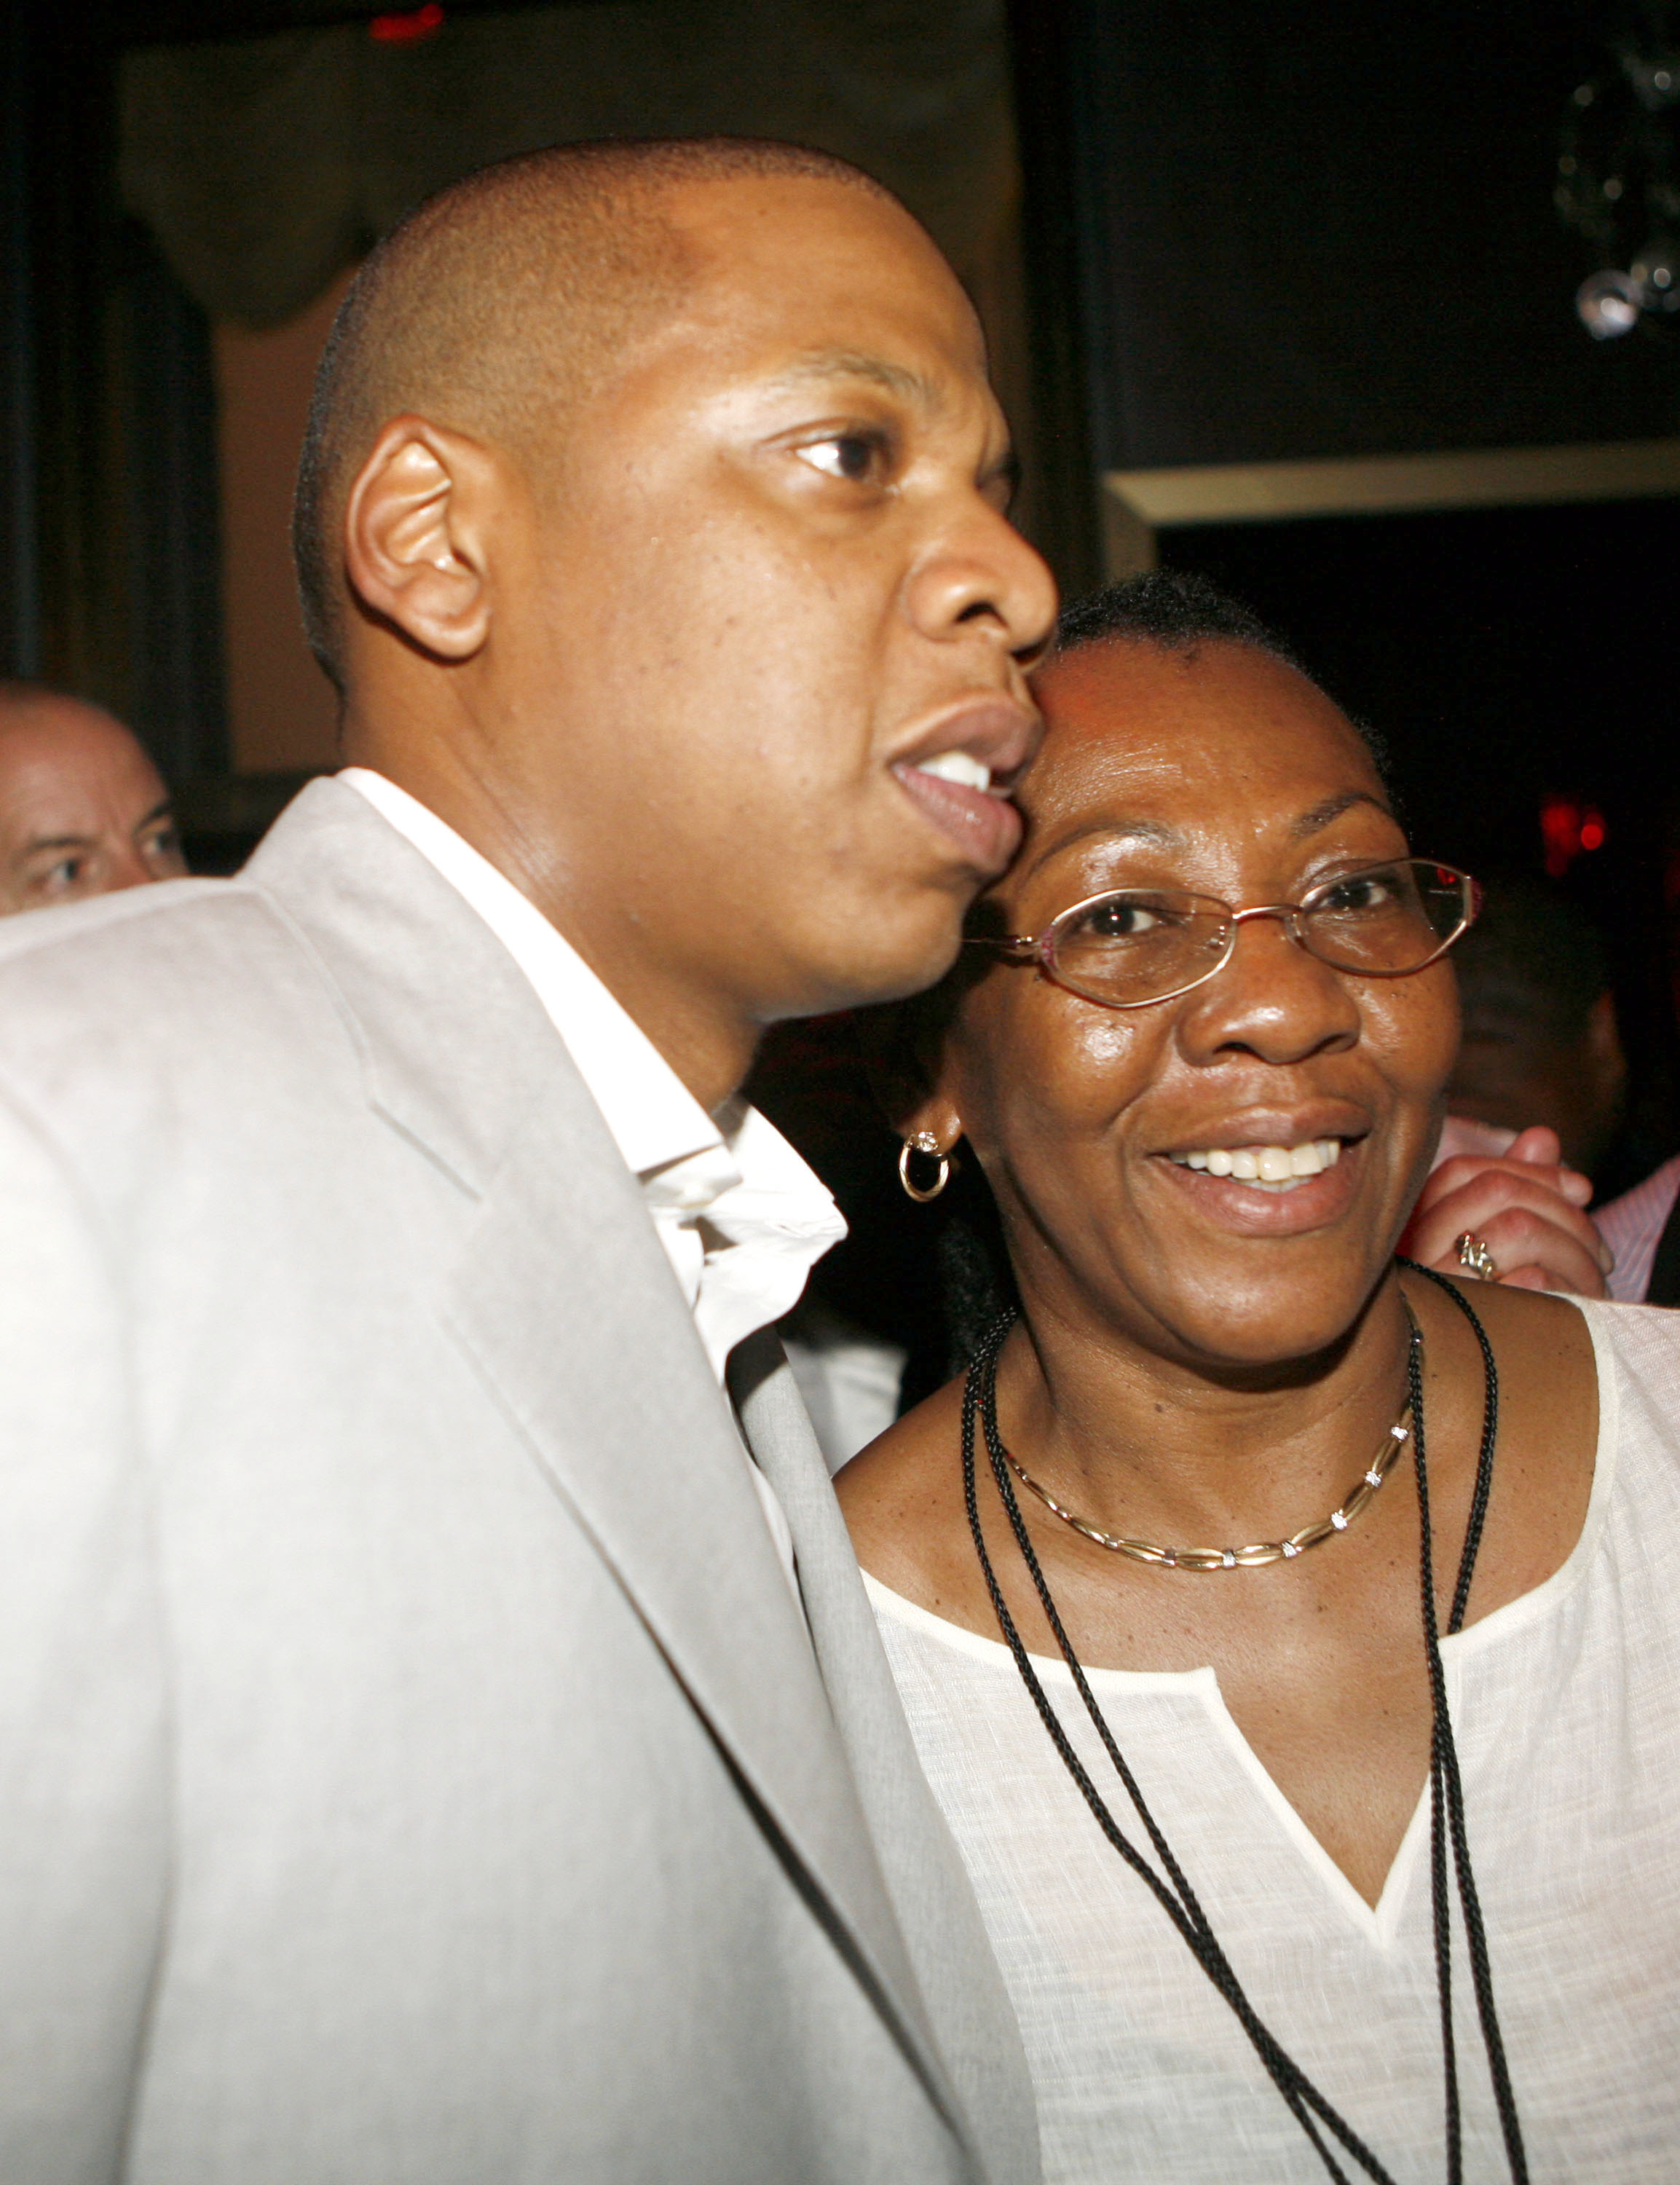 Jay-Z and his mother Gloria Carter at the 10th Anniversary of Jay-Z's album "Reasonable Doubt" at Rainbow Room in New York. | Source: Getty Images